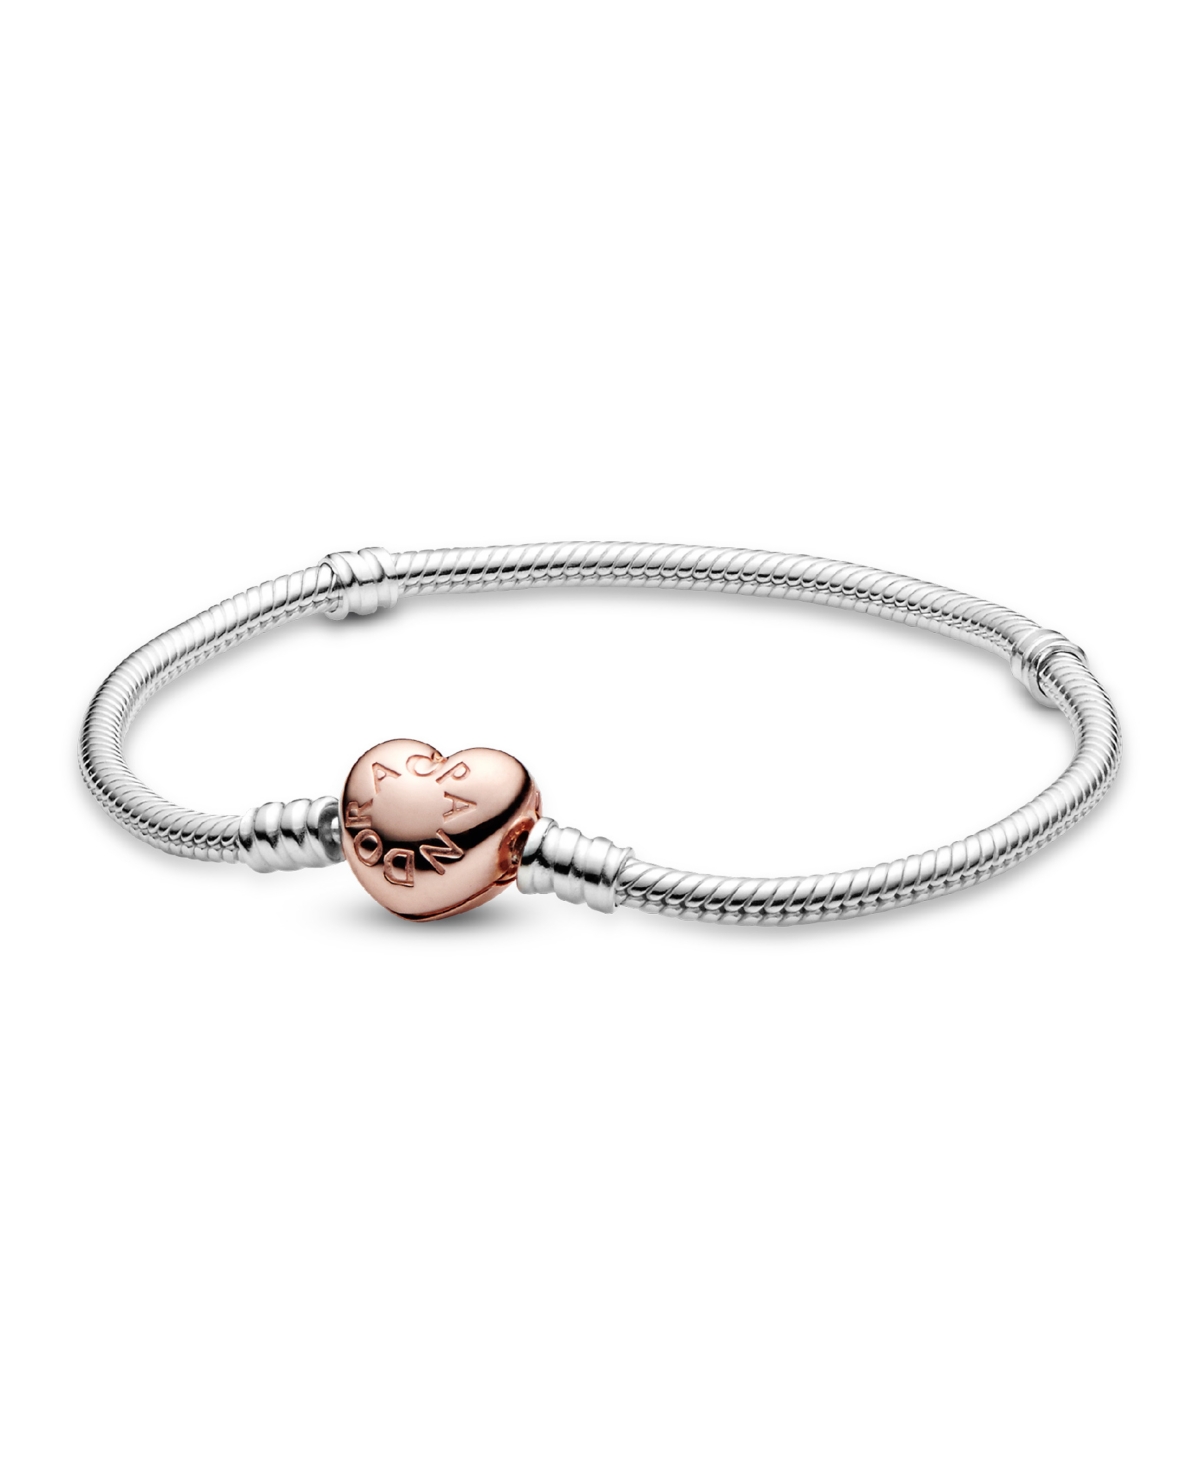 Moments Sterling Silver and 14K Rose Gold-Plated Heart Clasp Snake Chain Bracelet - Silver